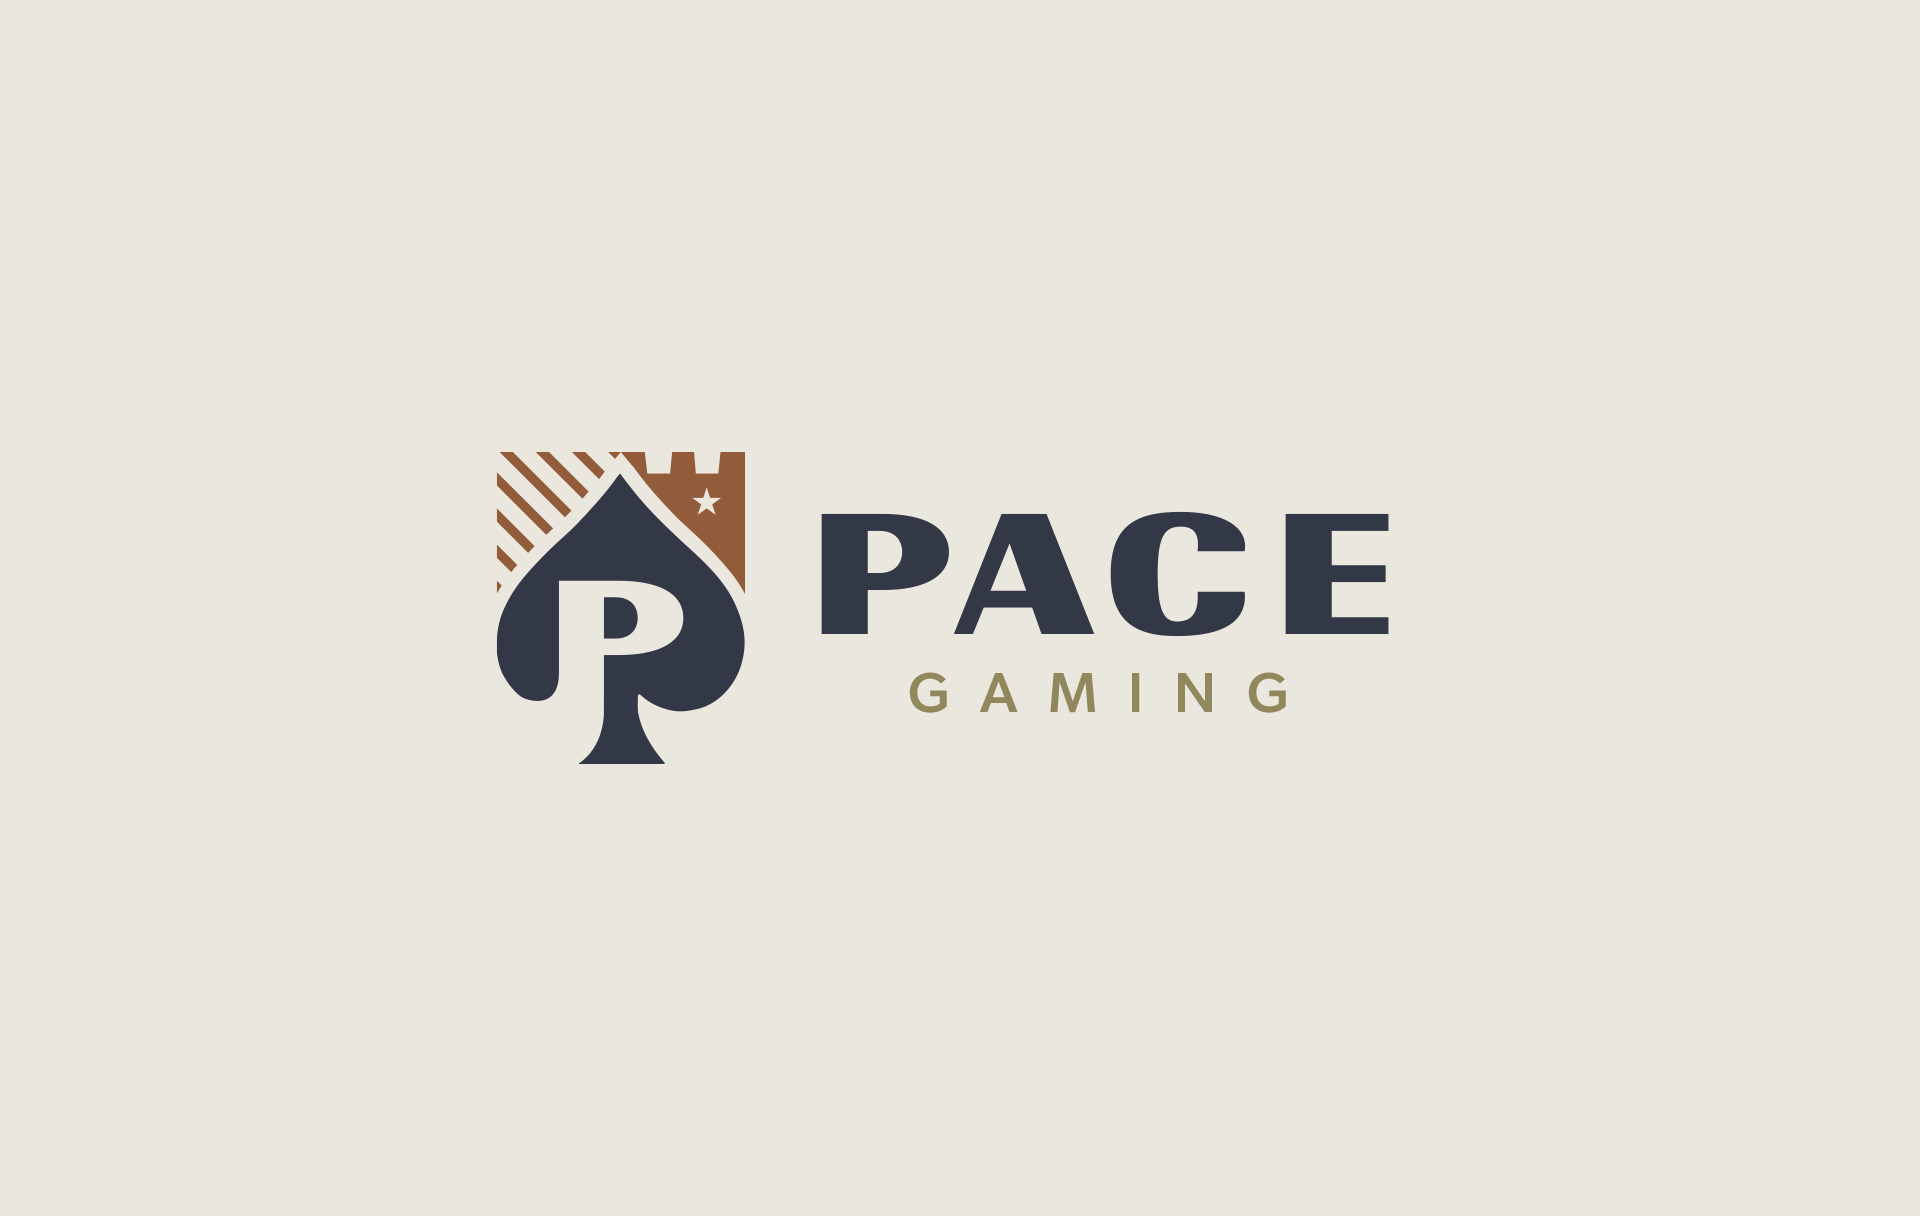 PACE Gaming